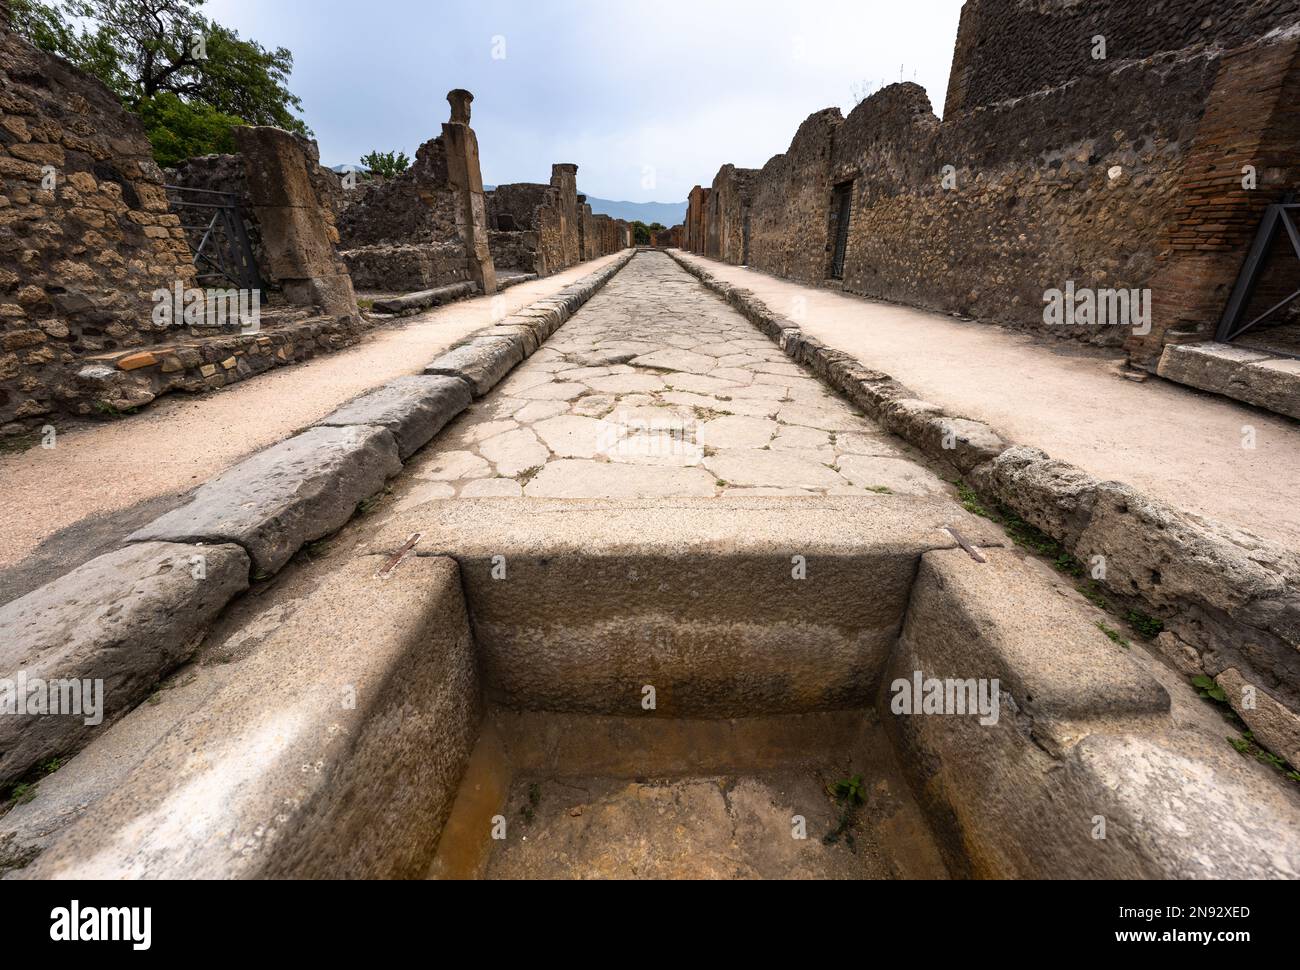 Street in the ruins of the ancient Roman city of Pompeii Stock Photo